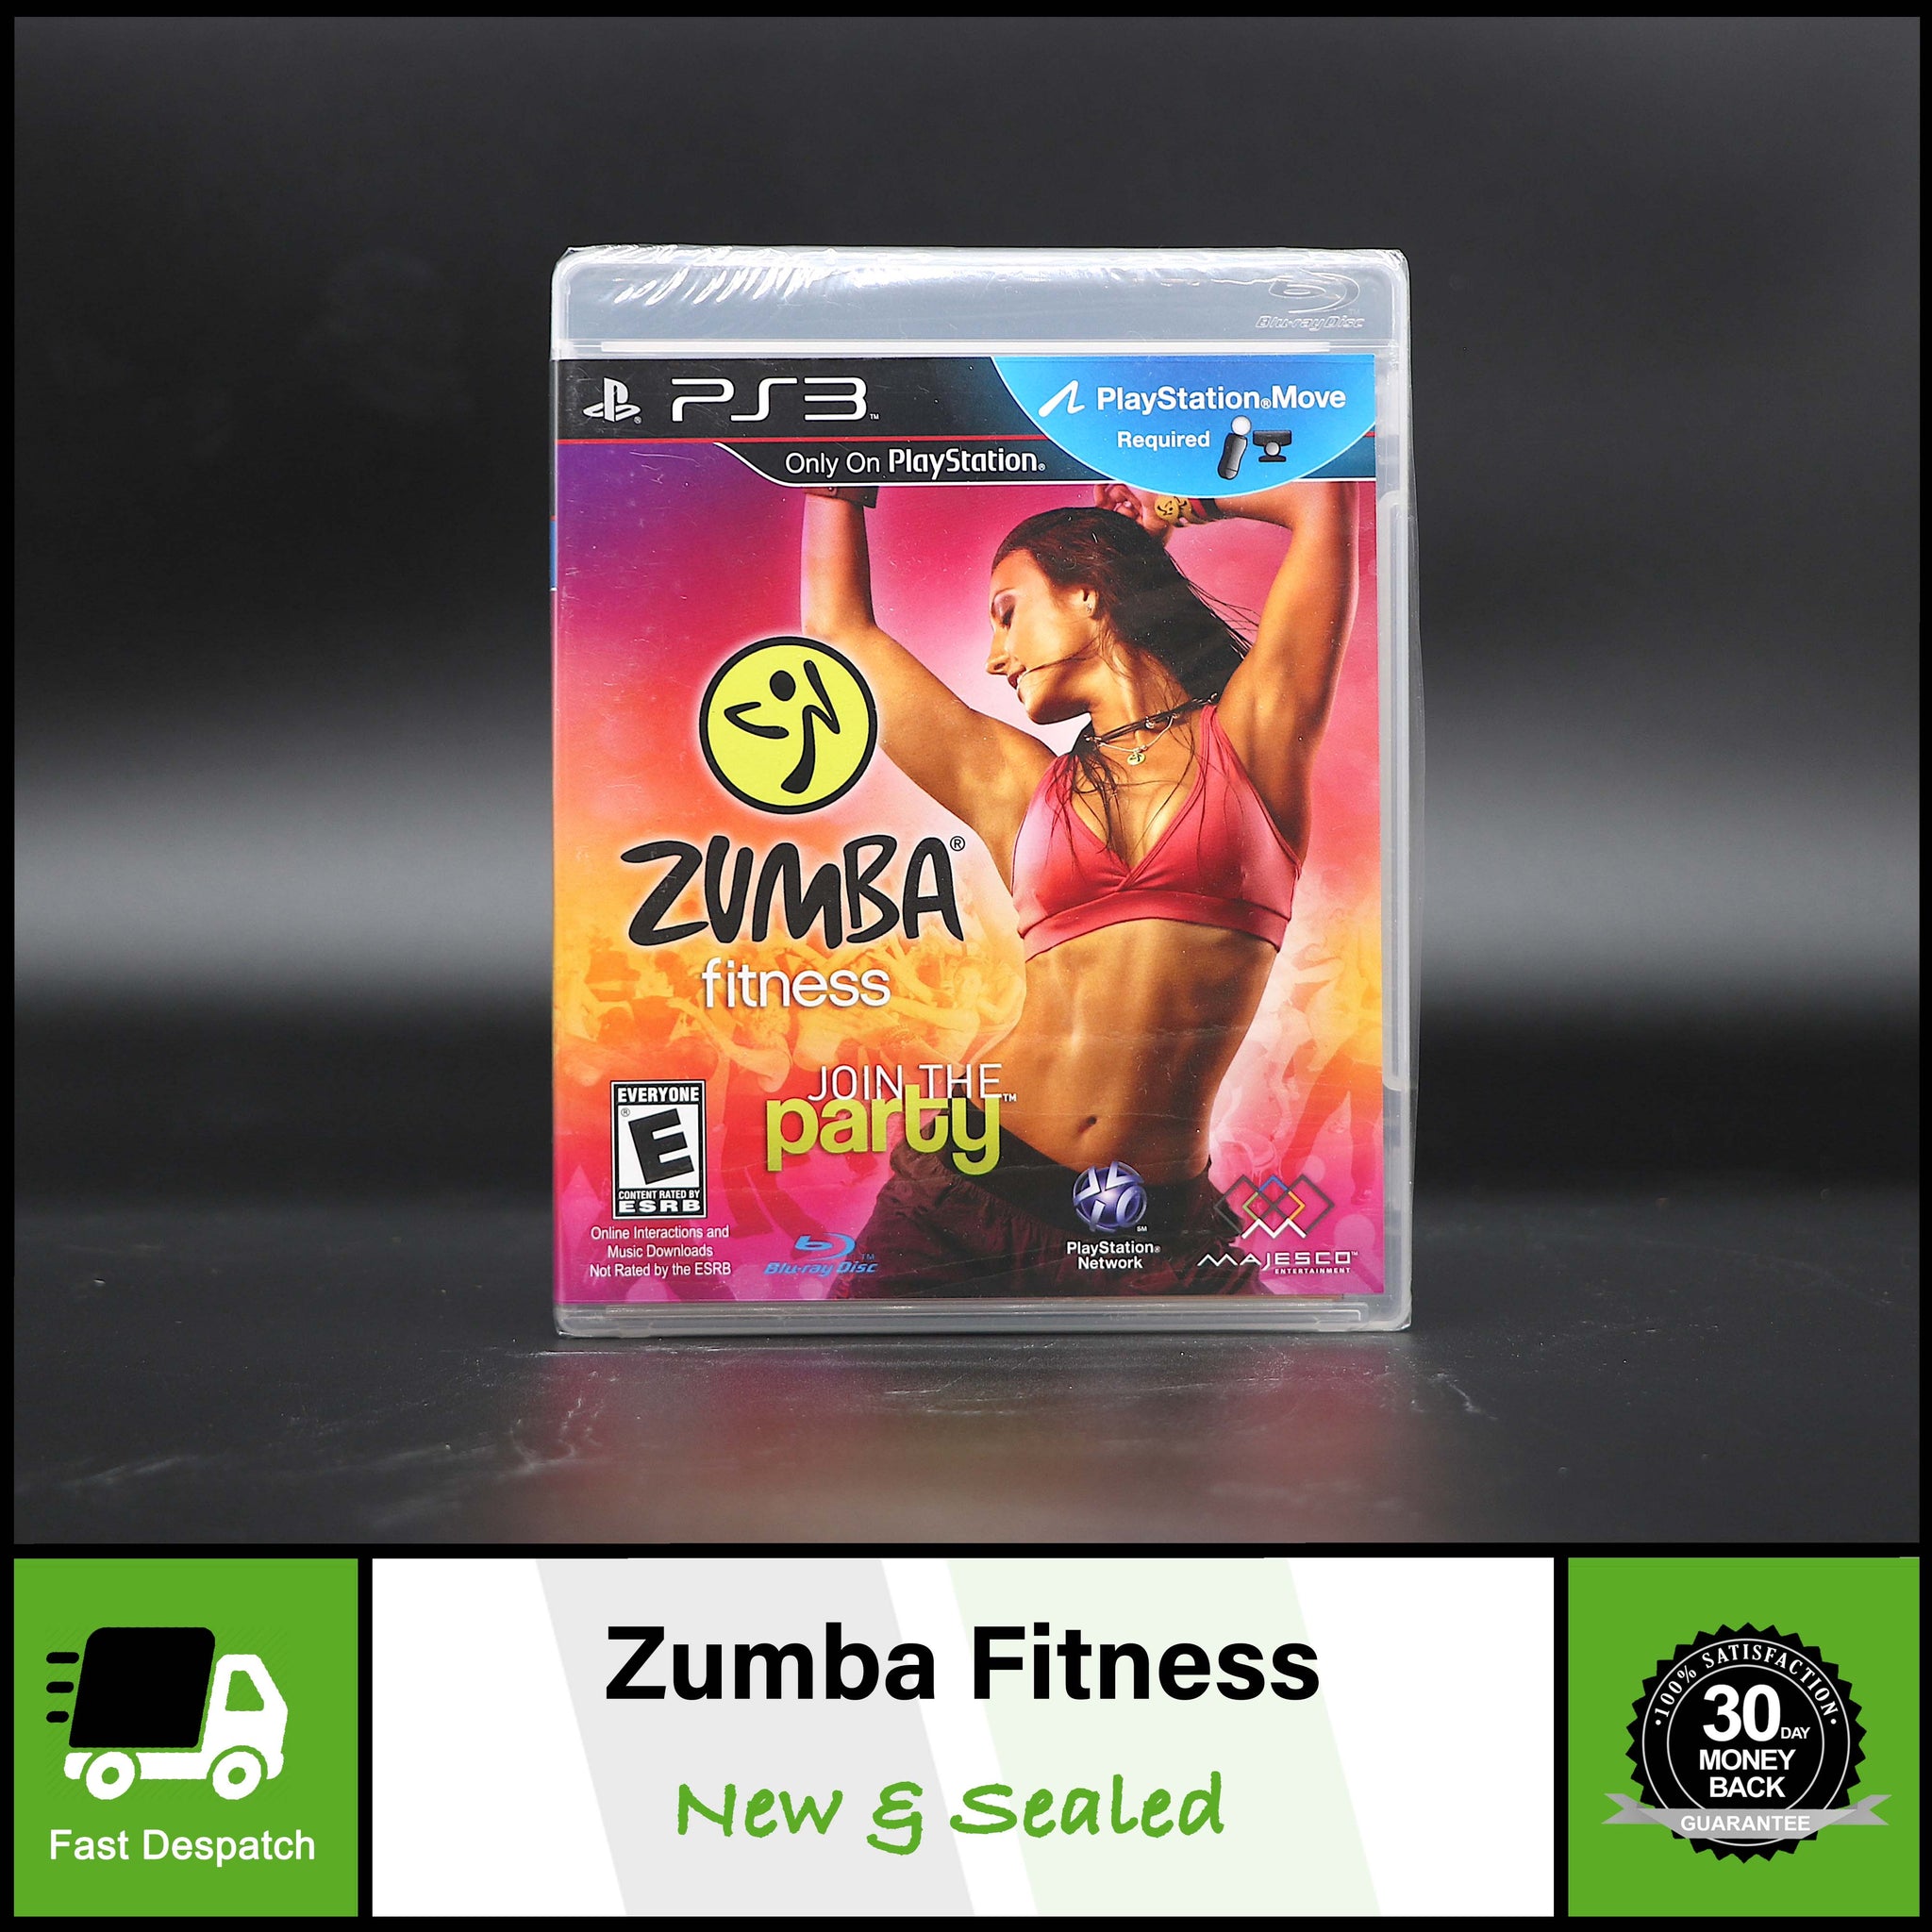 Zumba Fitness | Join The Party | Sony PlayStation 3 PS3 Game | New & Sealed